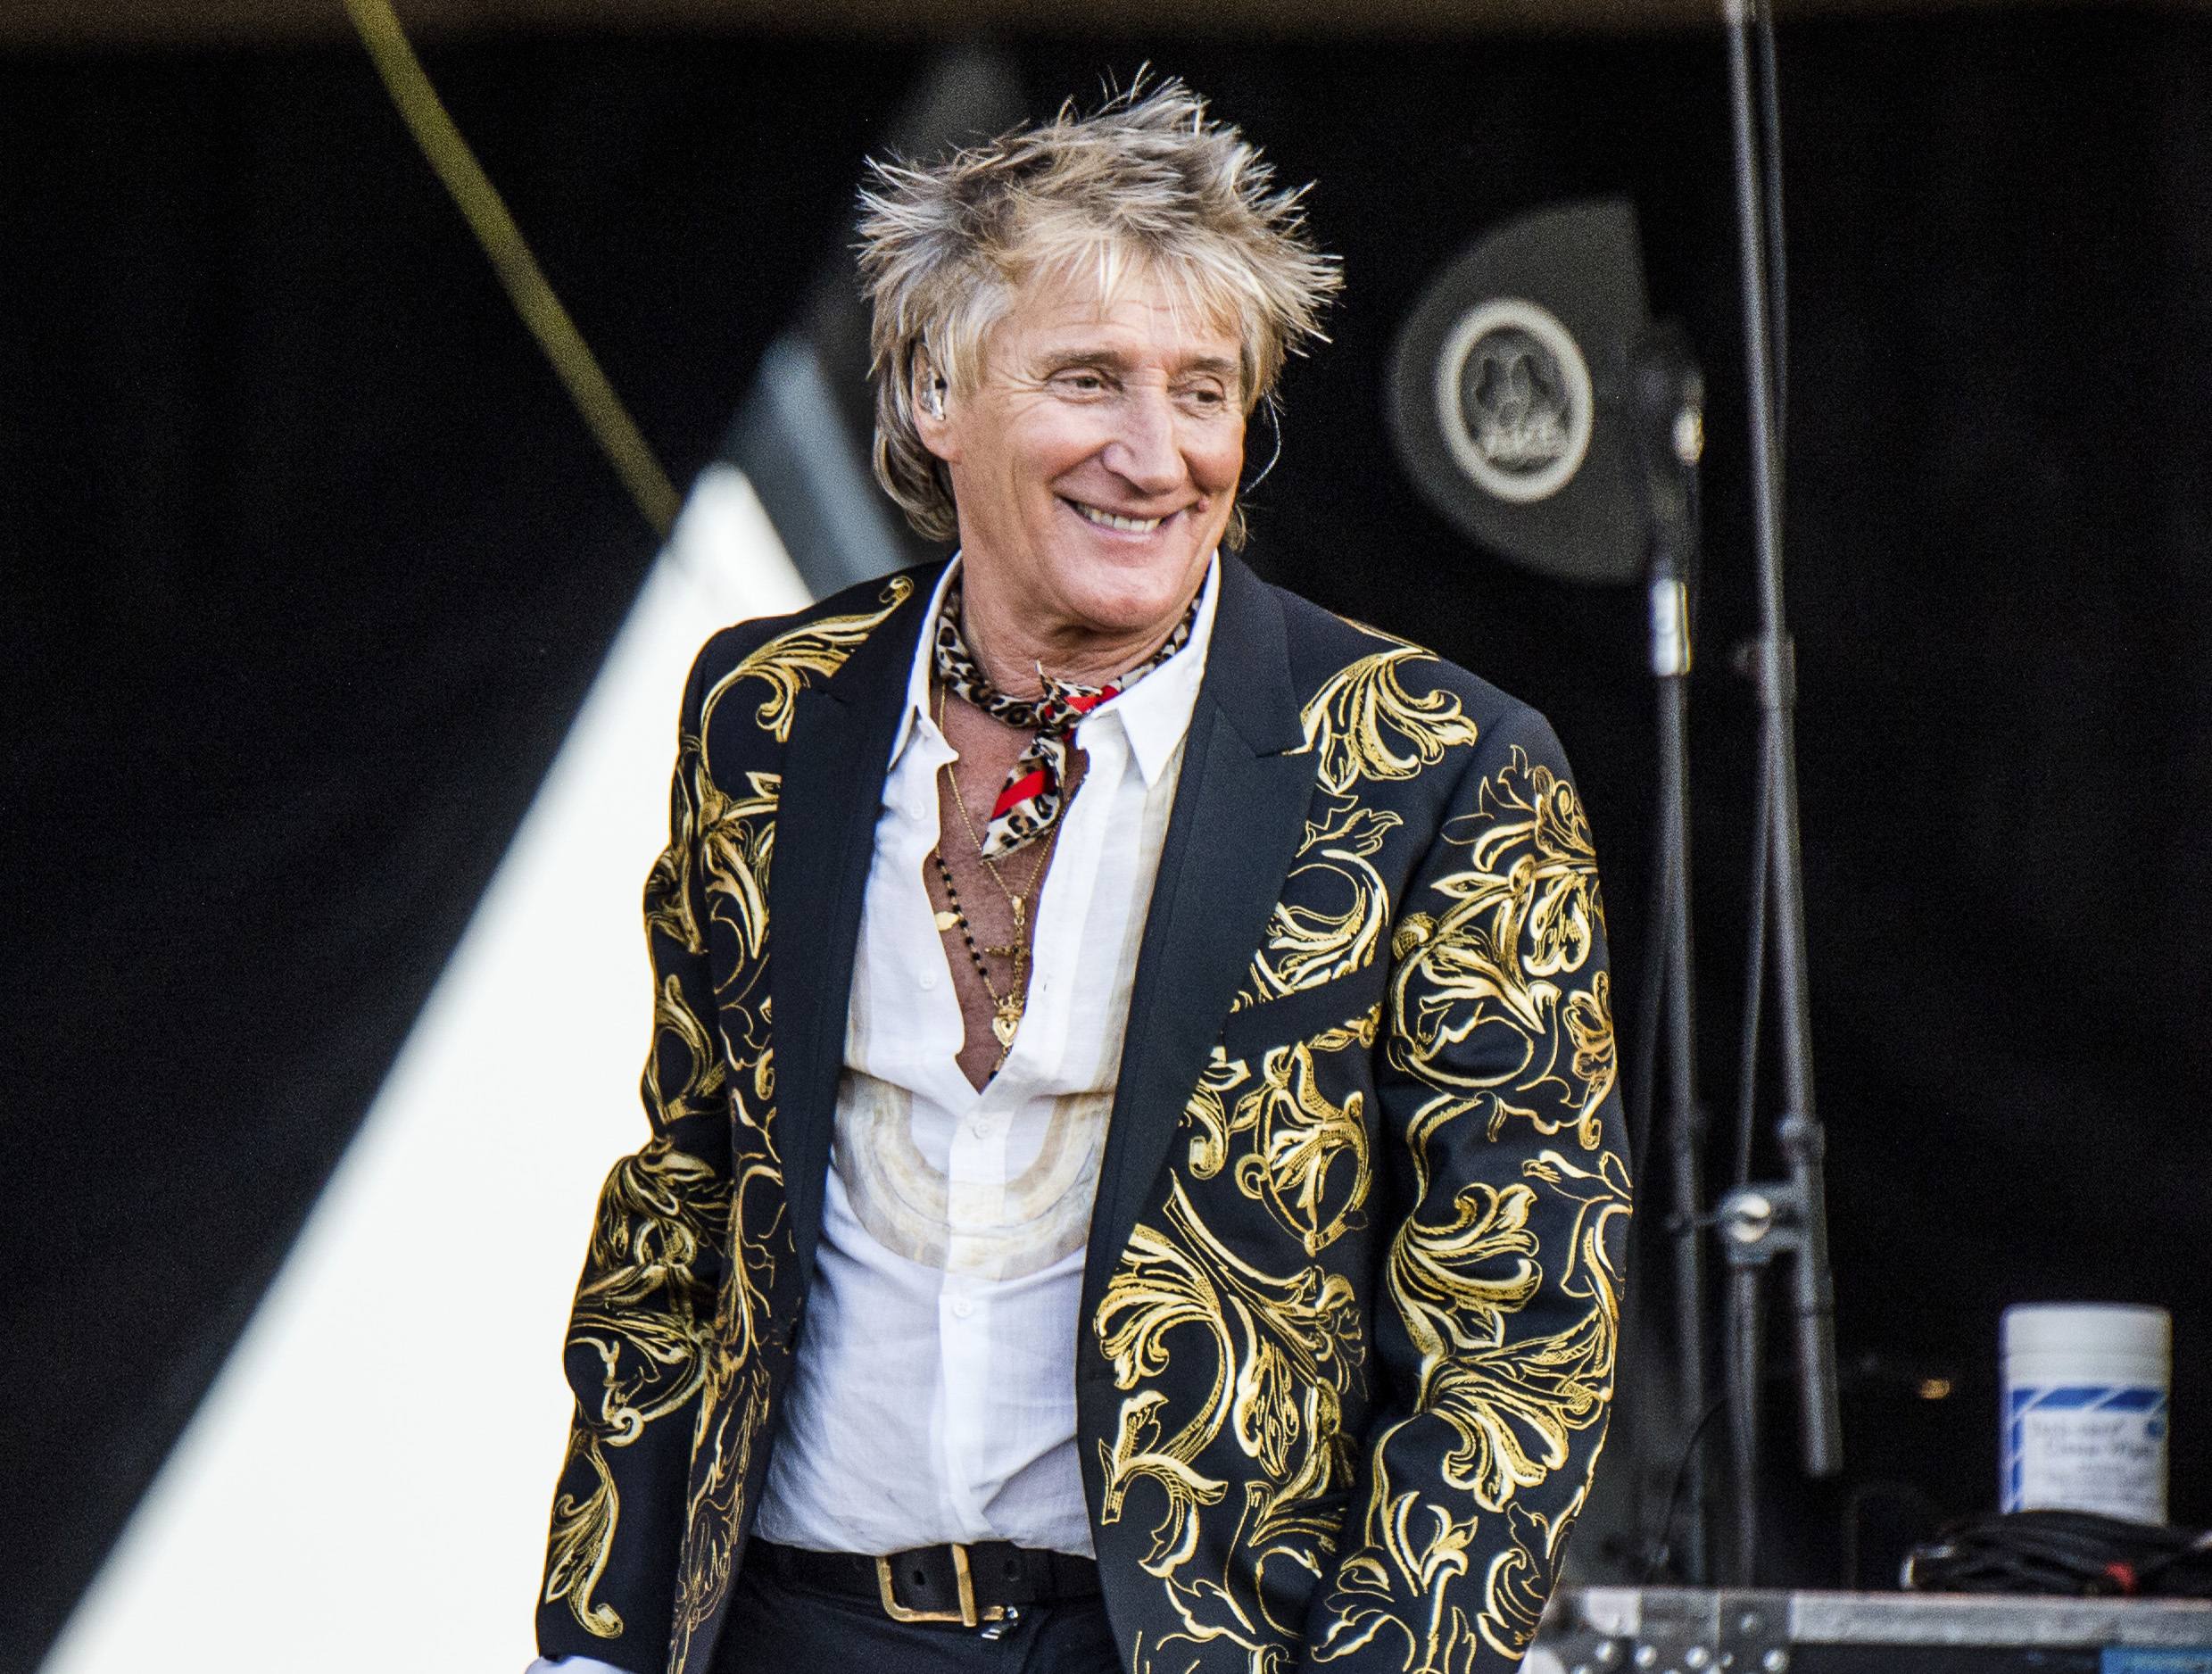 FILE - Rod Stewart performs at the New Orleans Jazz and Heritage Festival on April 28, 2018. A plea deal between Stewart and Florida prosecutors to settle charges he and his adult son Sean battered a security guard at a New Year's Eve party two years ago has fallen through. The pair are now scheduled to stand trial on misdemeanor battery charges in January. (Photo by Amy Harris/Invision/AP, File)